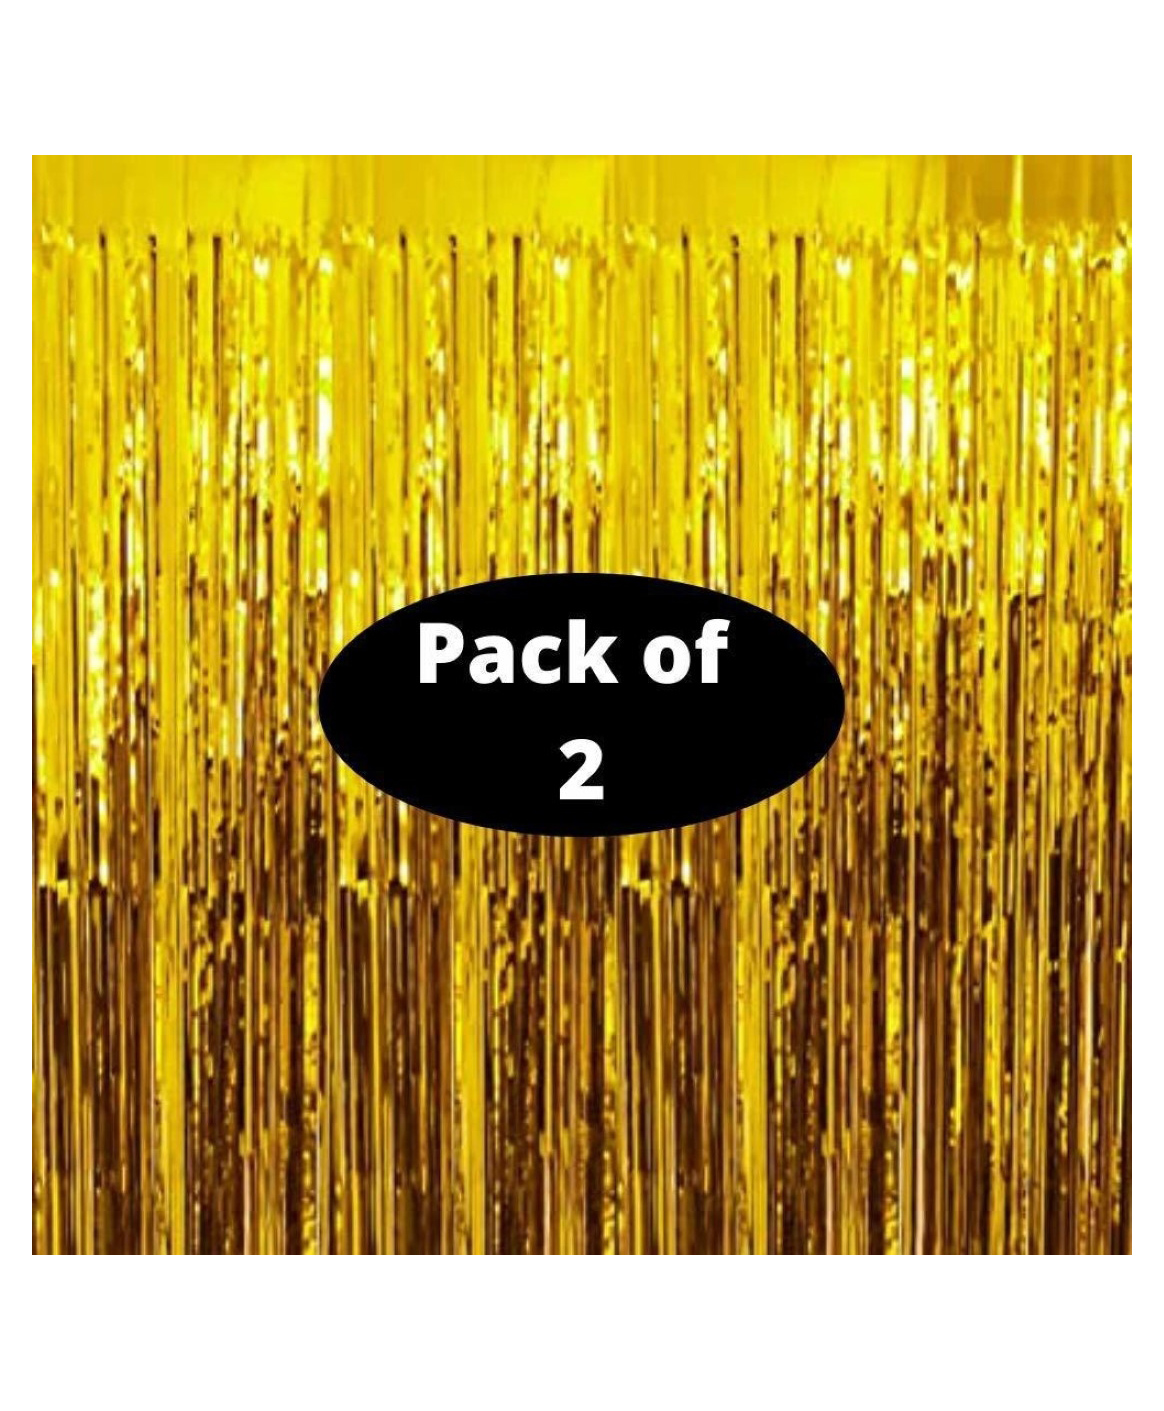 Bubble Trouble Golden Foil Curtains Birthday Decoration for Boys Girls Baby  Shower Golden Foil Fringe Tinsel Curtain - Pack of 2 Online in India, Buy  at Best Price from  - 10799896